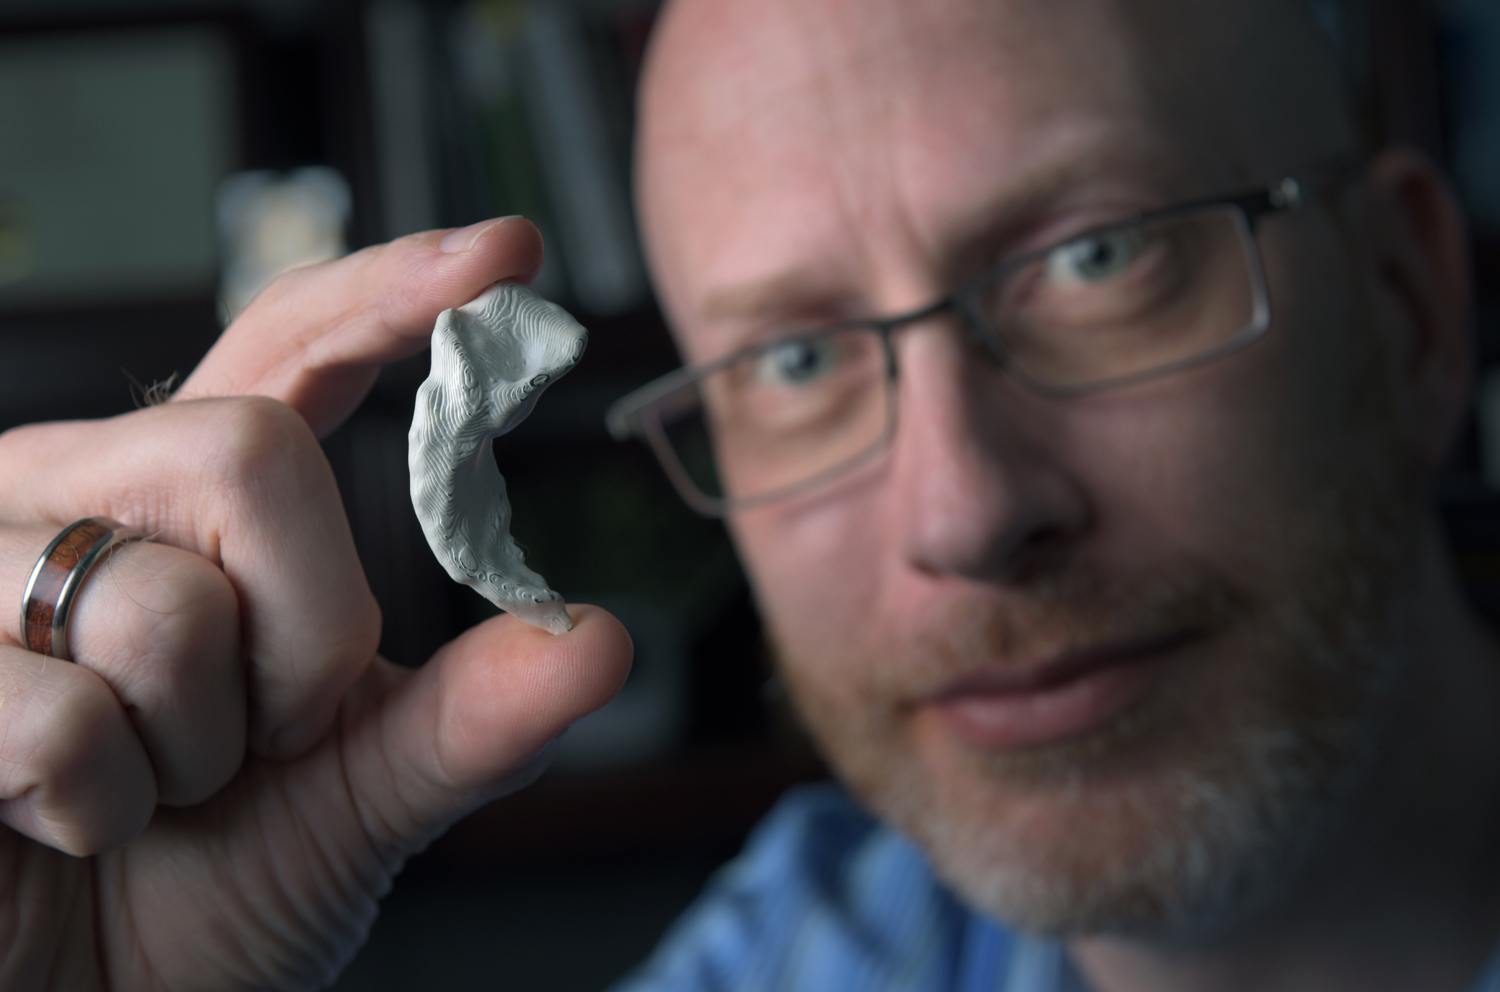 UCI professor of neurobiology & behavior Craig Stark, here holding a 3-D-printed model of his own hippocampus, says that "video games may be a nice, viable route" to maintaining cognitive health. Photo by Steve Zylius / UCI